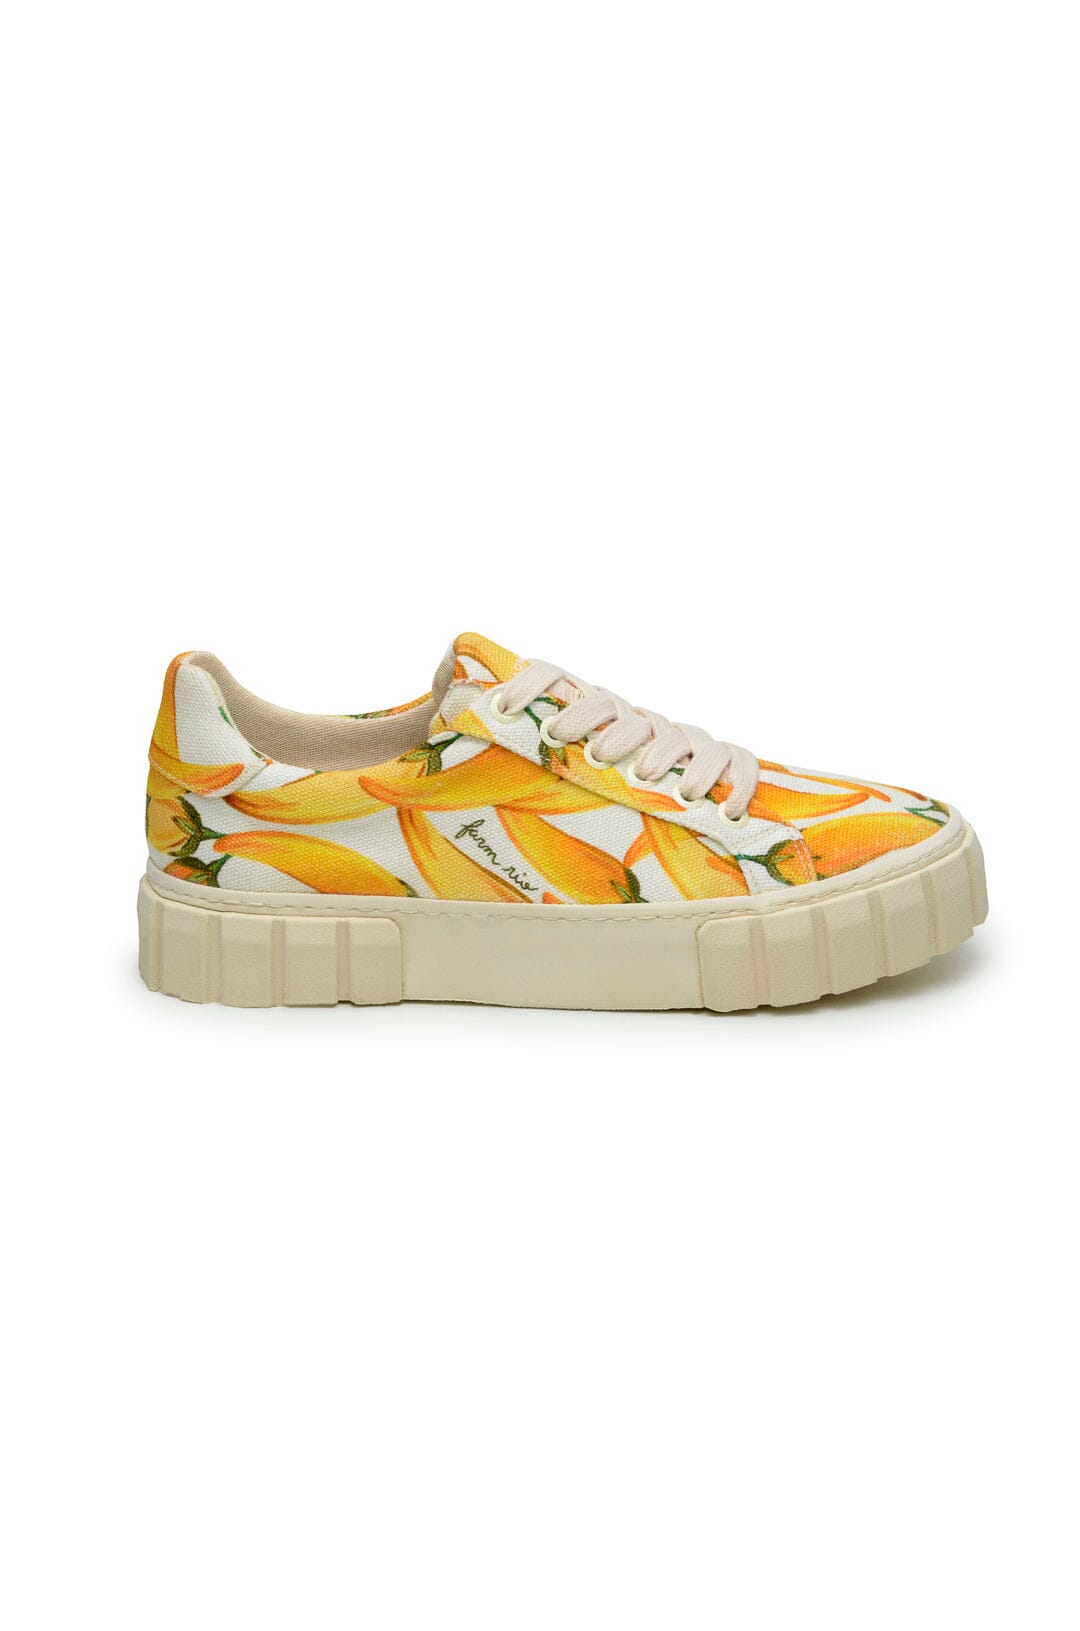 Off White Peppers Flatform Sneaker